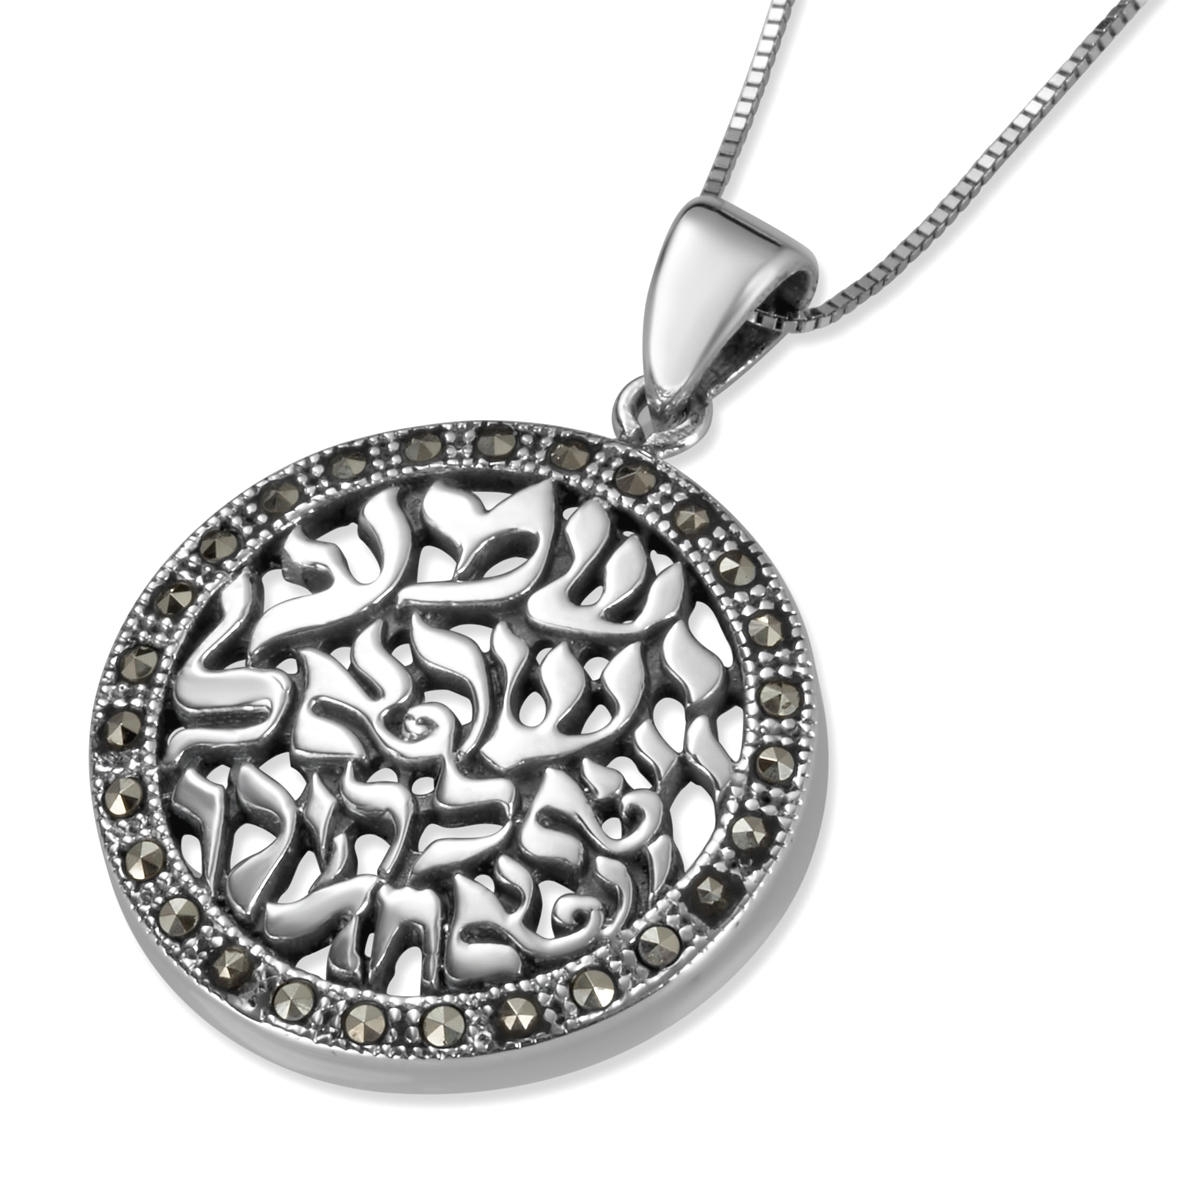 Sterling Silver "Shema Yisrael" Disk Pendant with Swiss Marcasite - 1